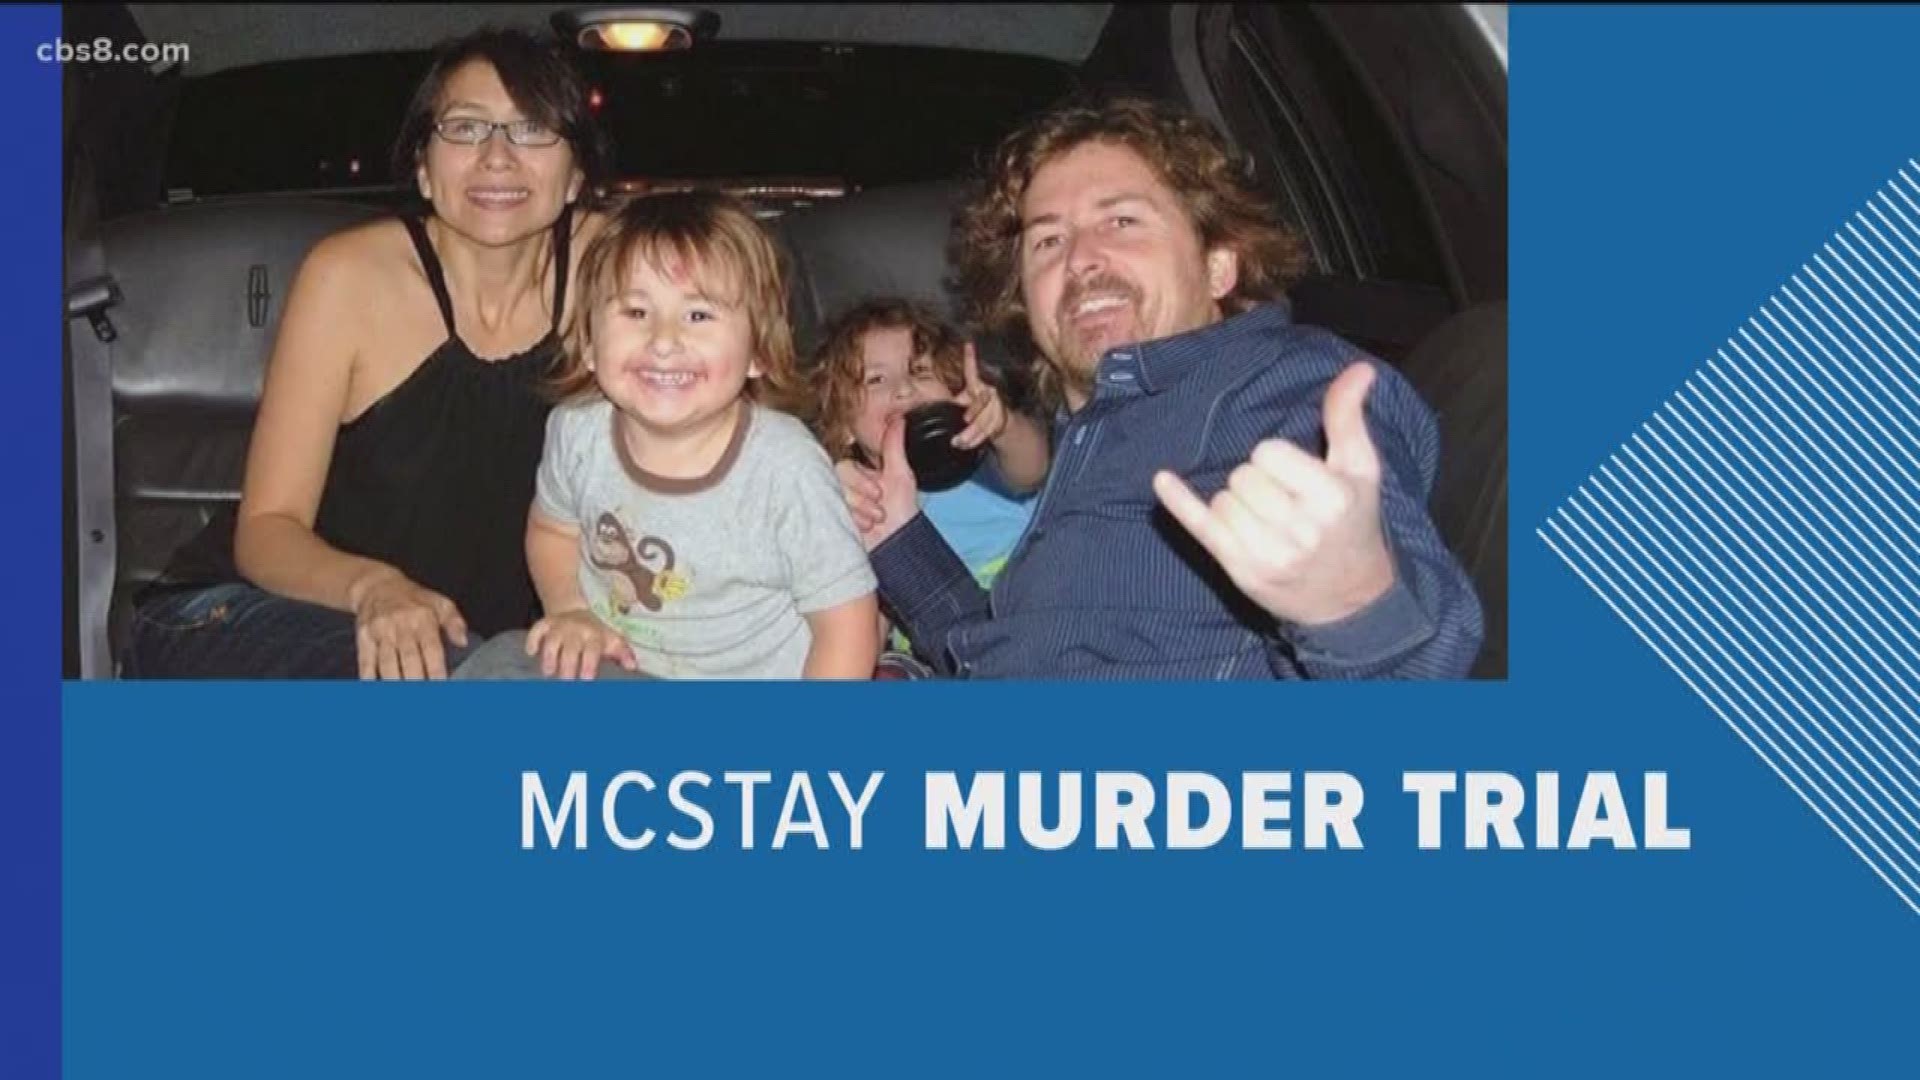 Nearly a decade ago, Joseph and Summer McStay and their two young boys, four-year-old Gianni and three-year-old Joseph, vanished without a trace from their Fallbrook home in February 2010. A News 8 team will be in Riverside Monday morning for the verdict’s announcement.